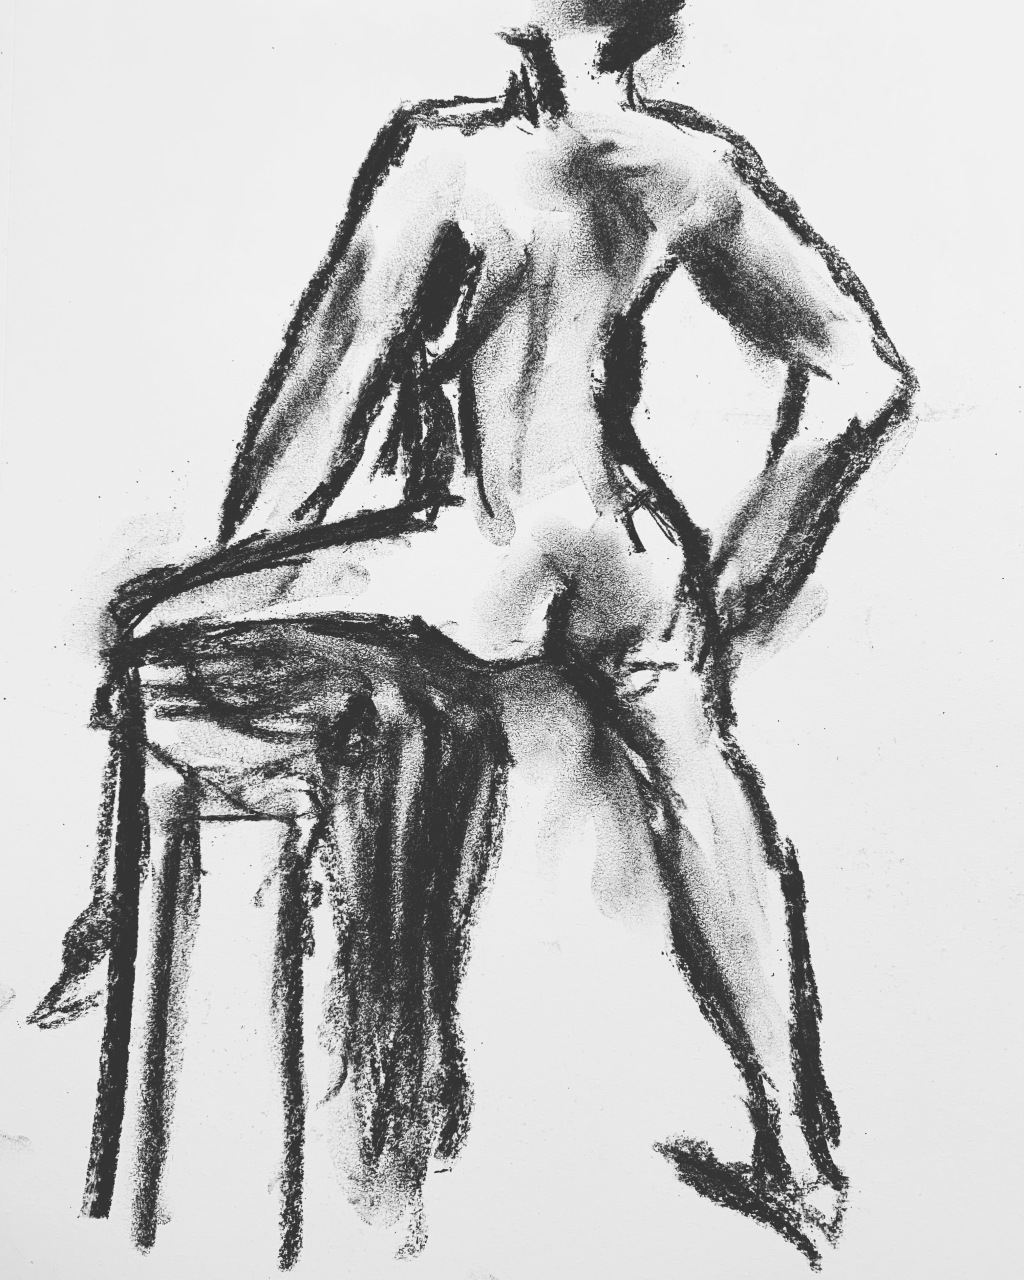 Charcoal sketches